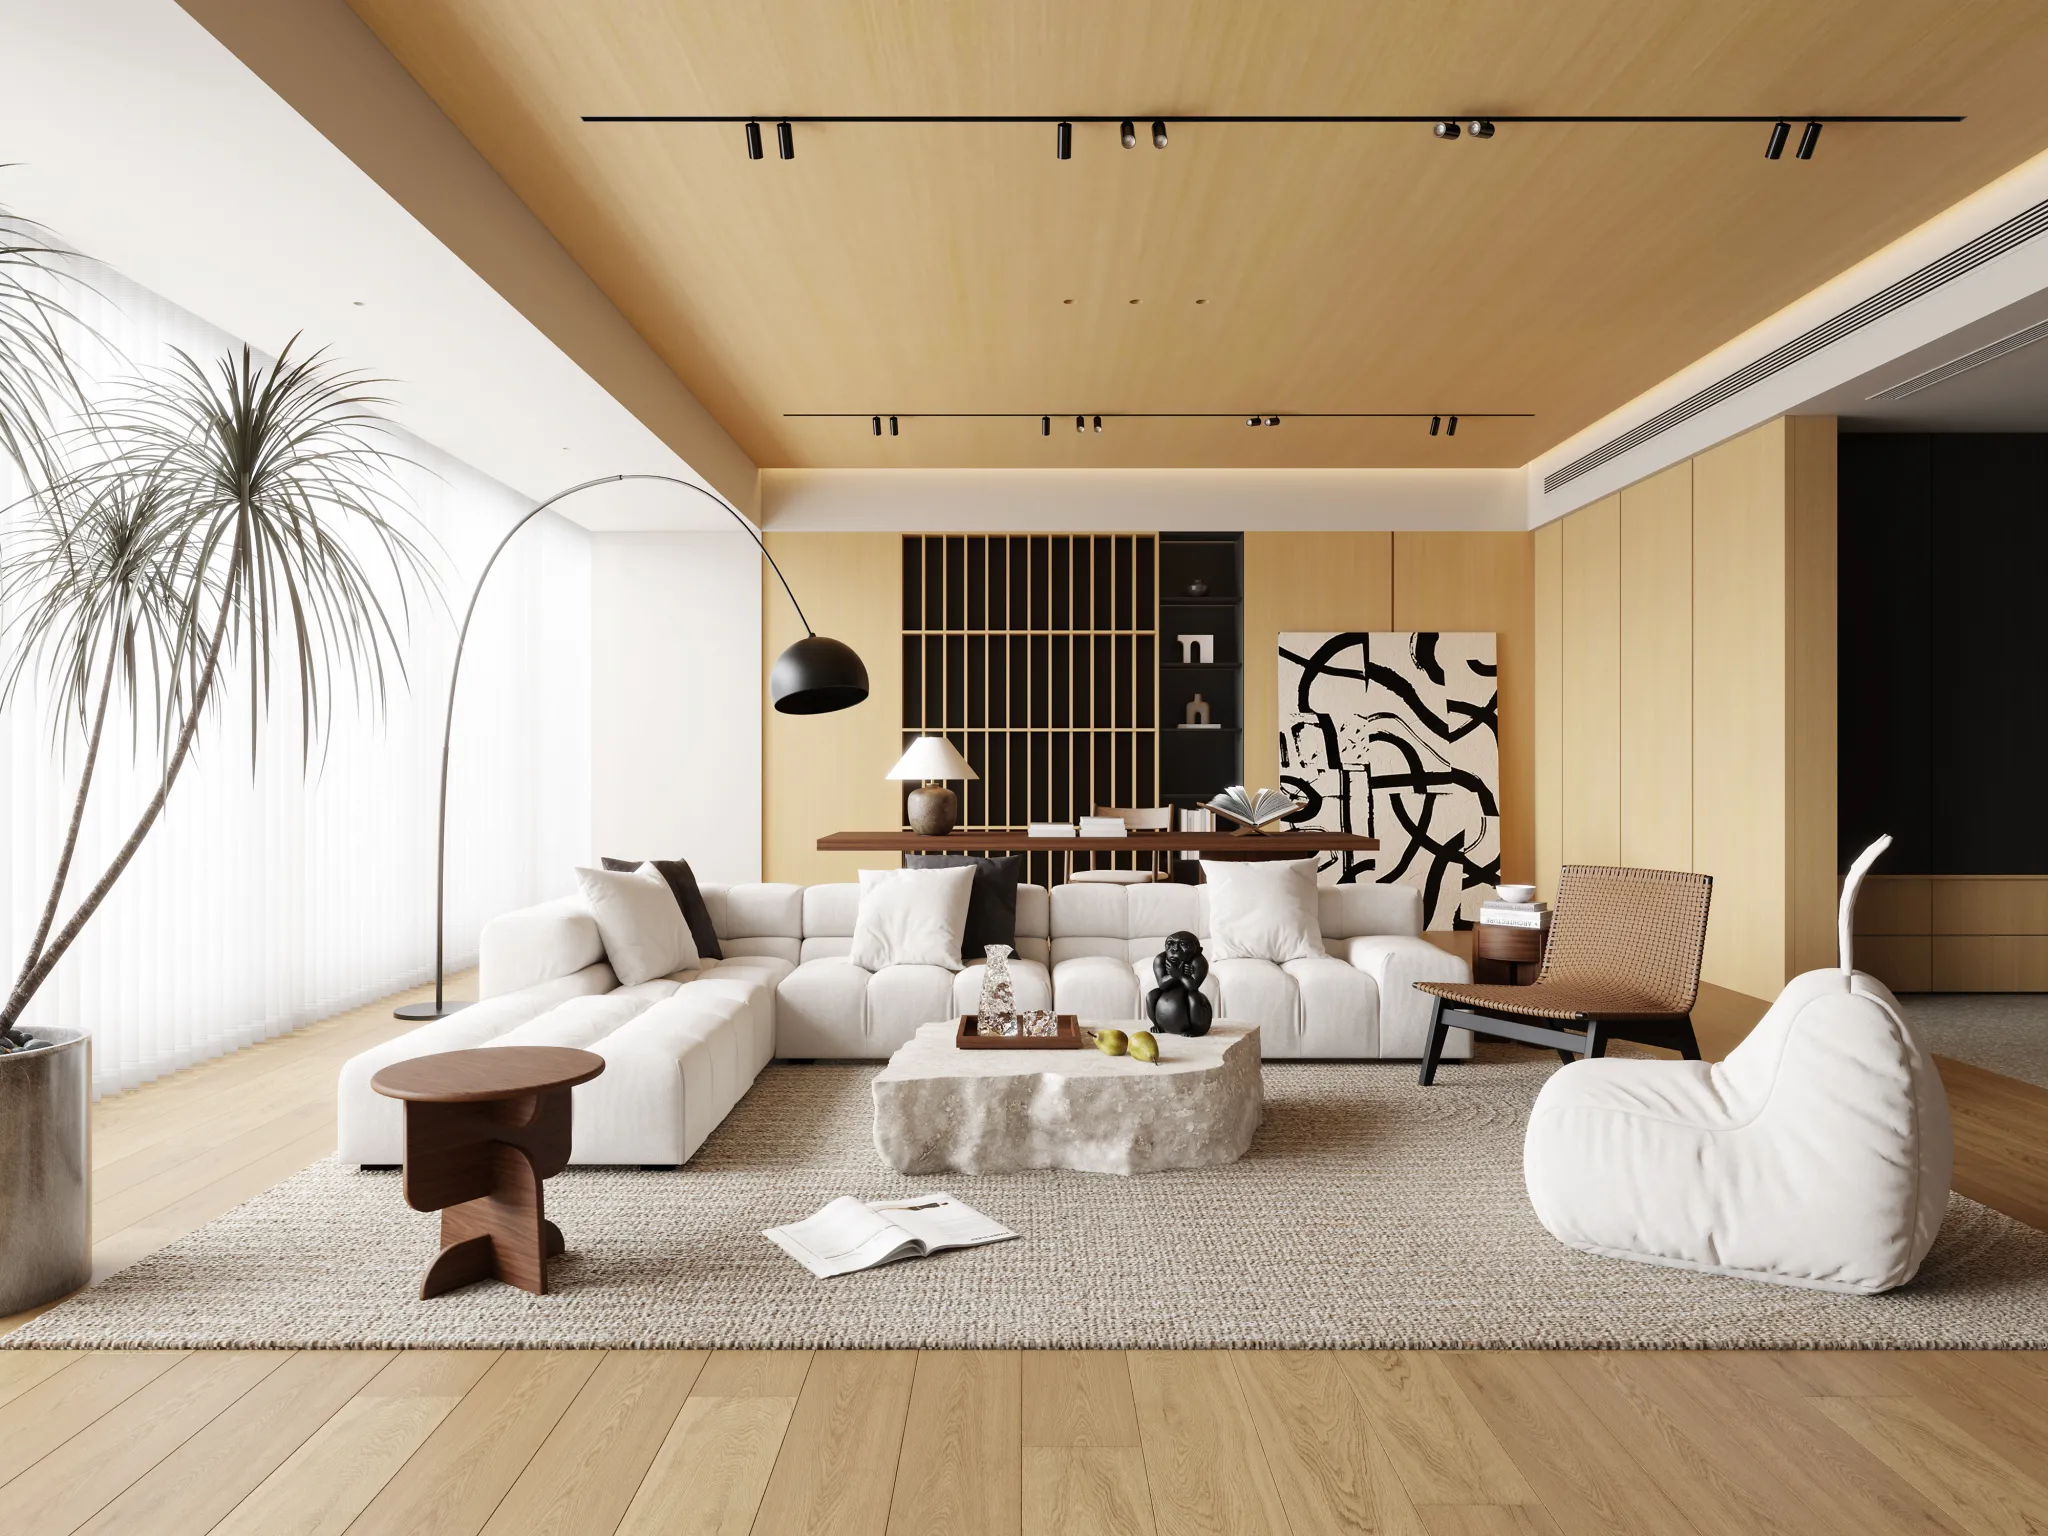 HOUSE SPACE 3D SCENES – LIVING ROOM – 0017